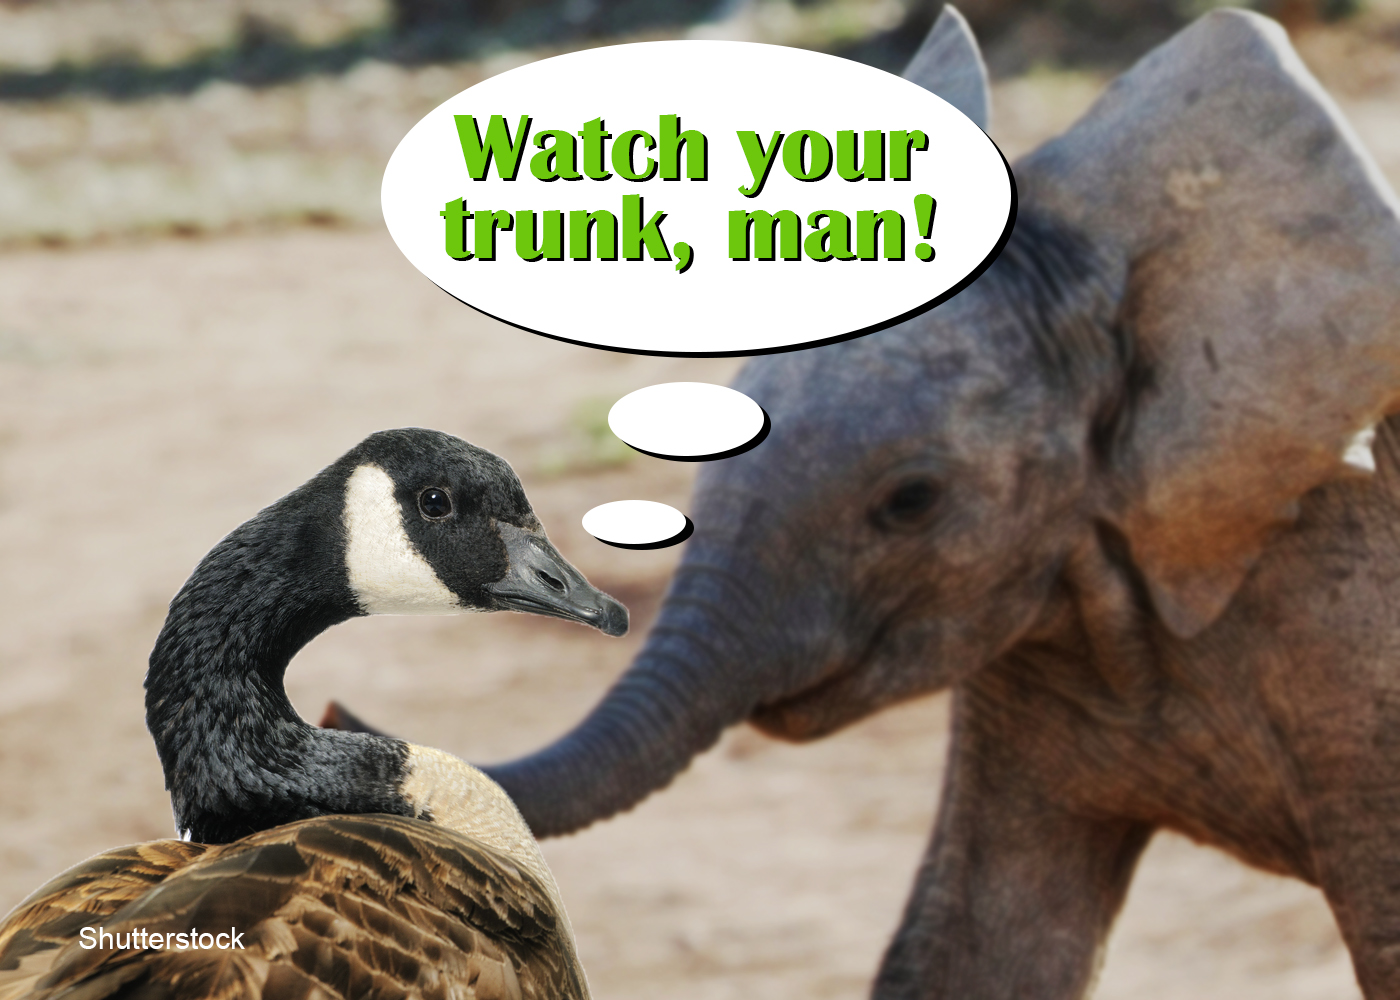 goose vs elephant fight featured image